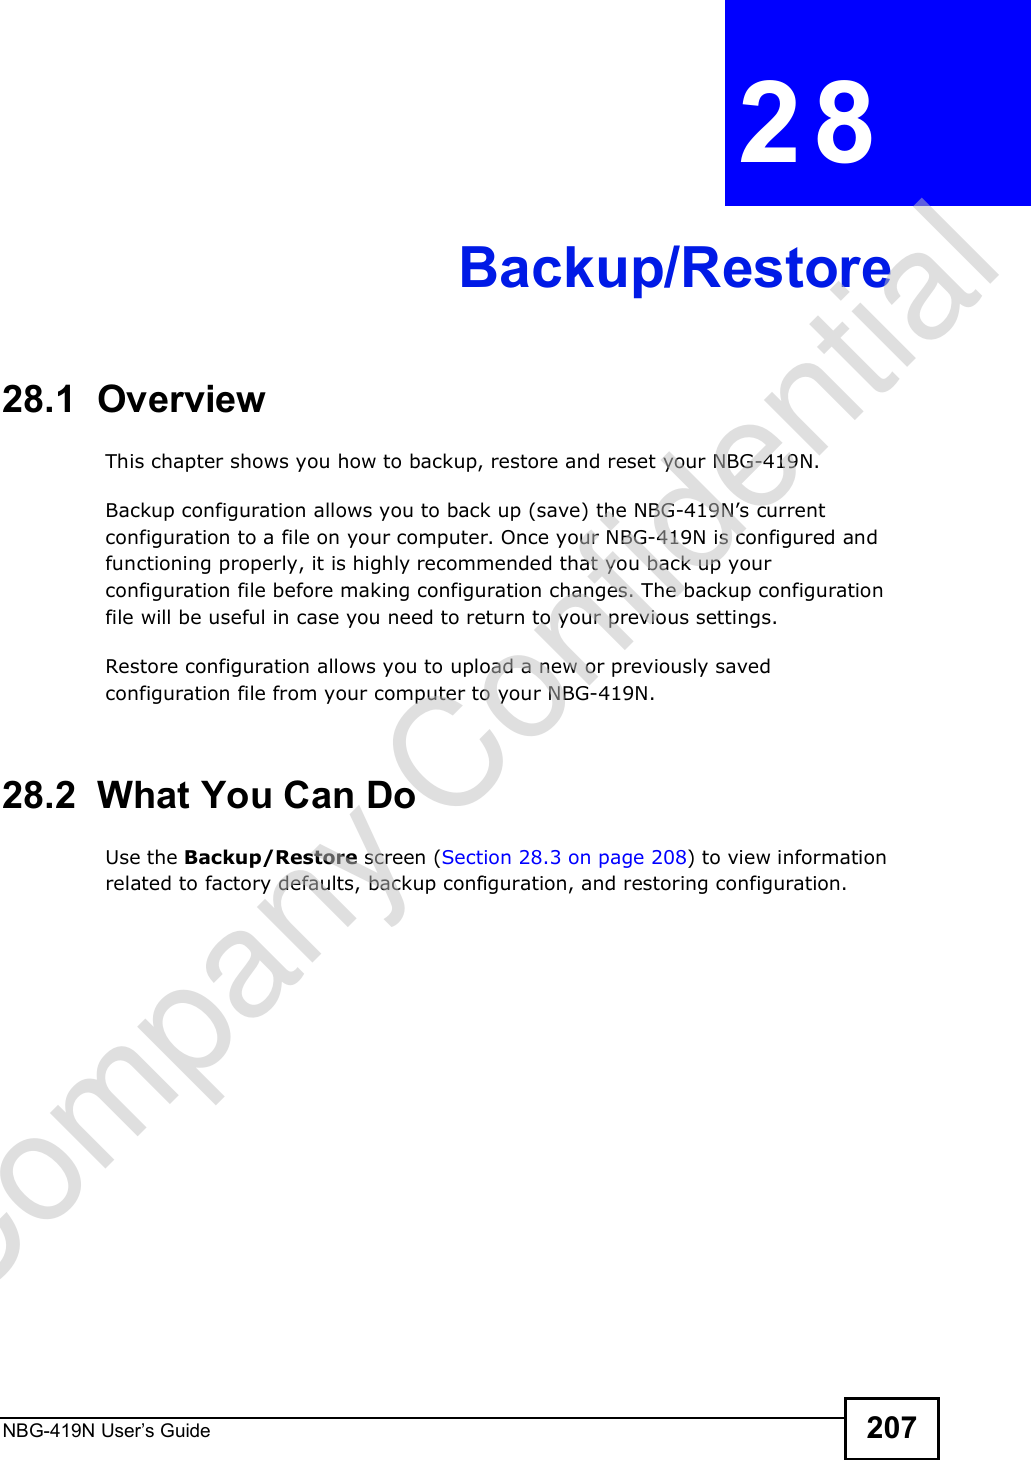 NBG-419N User s Guide 207CHAPTER  28 Backup/Restore28.1  OverviewThis chapter shows you how to backup, restore and reset your NBG-419N.Backup configuration allows you to back up (save) the NBG-419N!s current configuration to a file on your computer. Once your NBG-419N is configured and functioning properly, it is highly recommended that you back up your configuration file before making configuration changes. The backup configuration file will be useful in case you need to return to your previous settings. Restore configuration allows you to upload a new or previously saved configuration file from your computer to your NBG-419N.28.2  What You Can DoUse the Backup/Restore screen (Section 28.3 on page 208) to view information related to factory defaults, backup configuration, and restoring configuration.Company Confidential